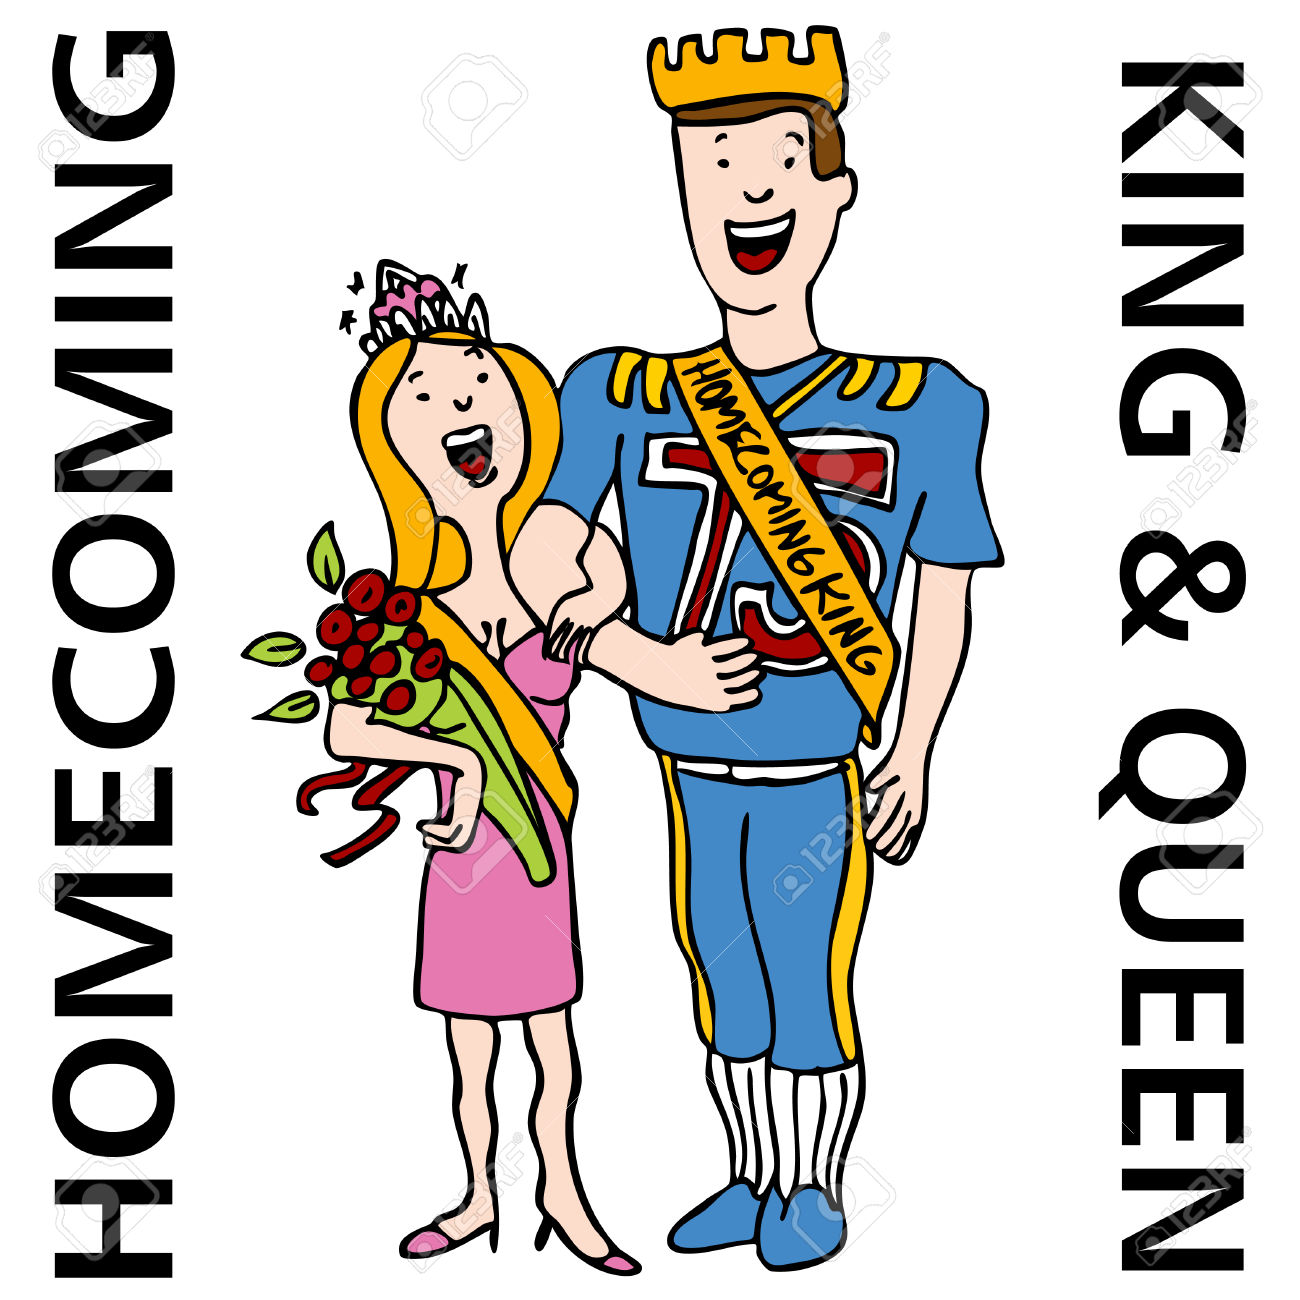 Homecoming king and queen clipart free download jpg